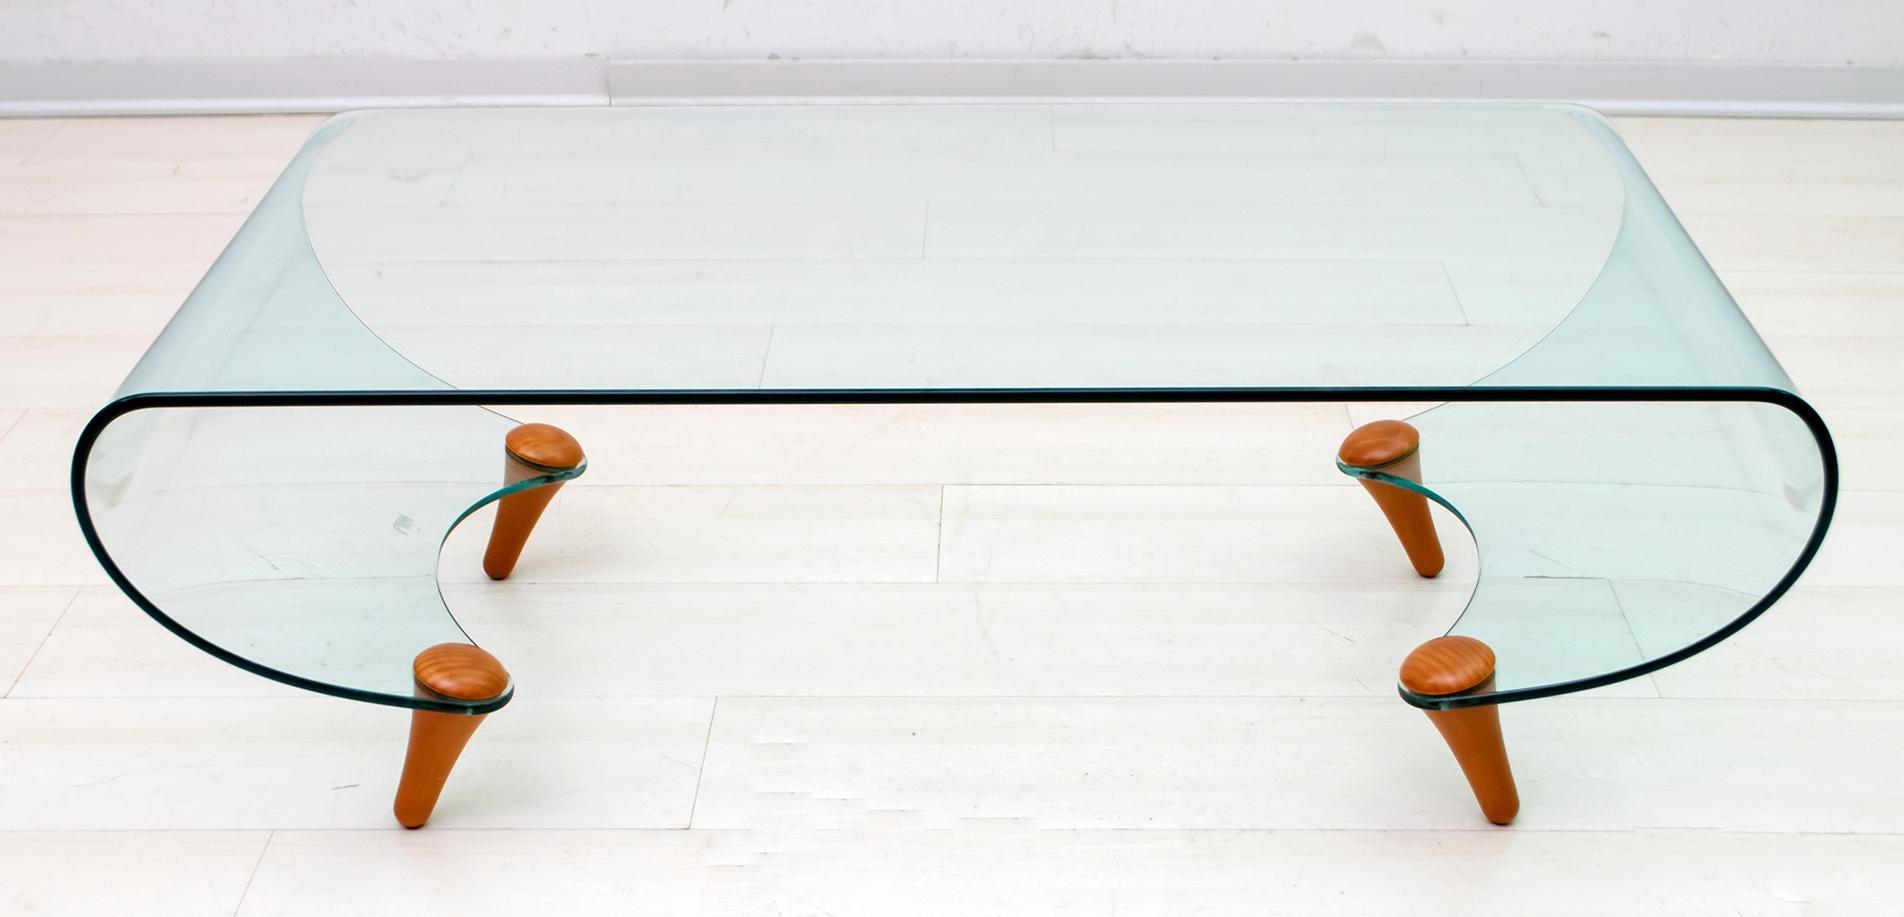 This coffee table was designed in 1996 by Fabio di Bartolomei for the Italian glass specialist Fiam Italia. The table has a curved glass top and four wooden legs.
No longer in production. Signed in the glass: FIAM Italia AB-II. Very good